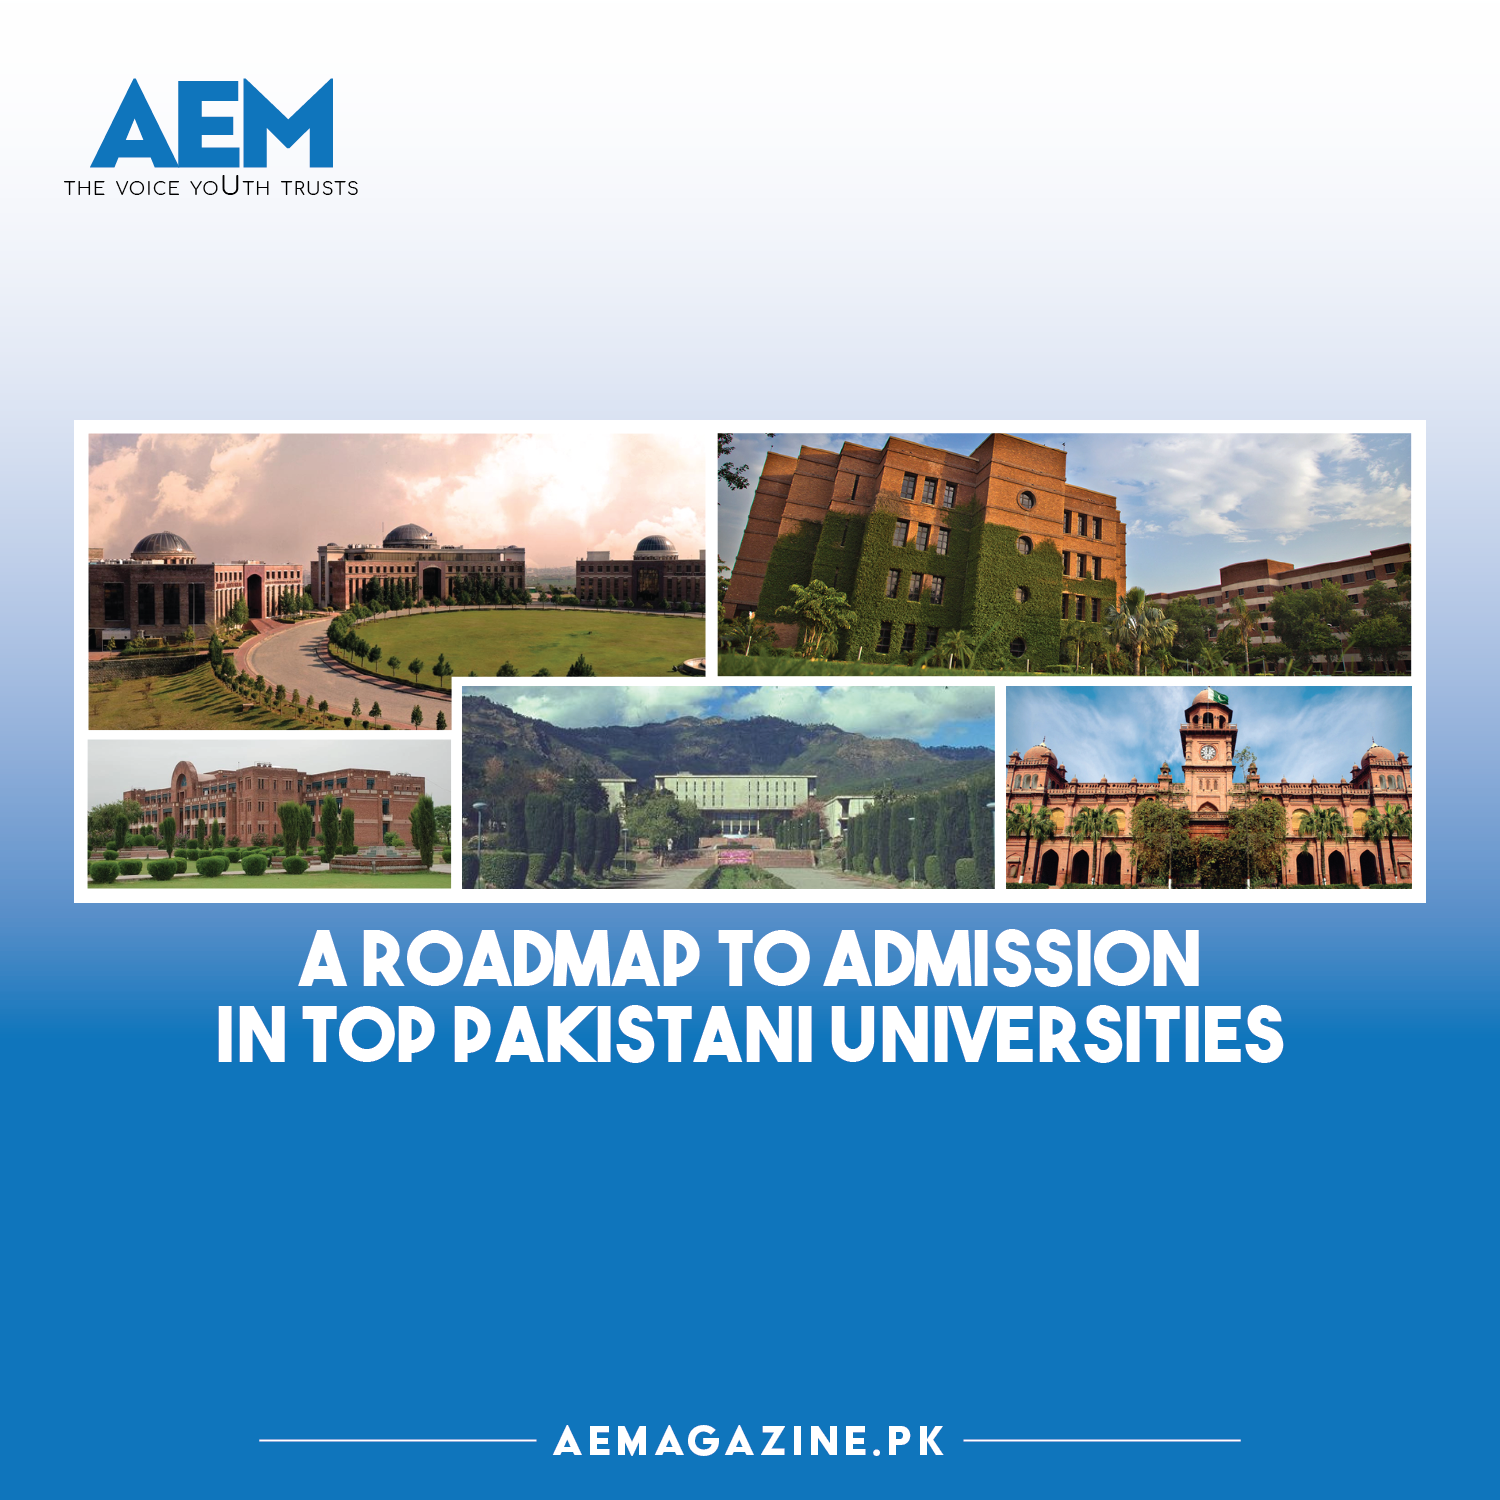 A Roadmap To Admission in Top Pakistani Universities